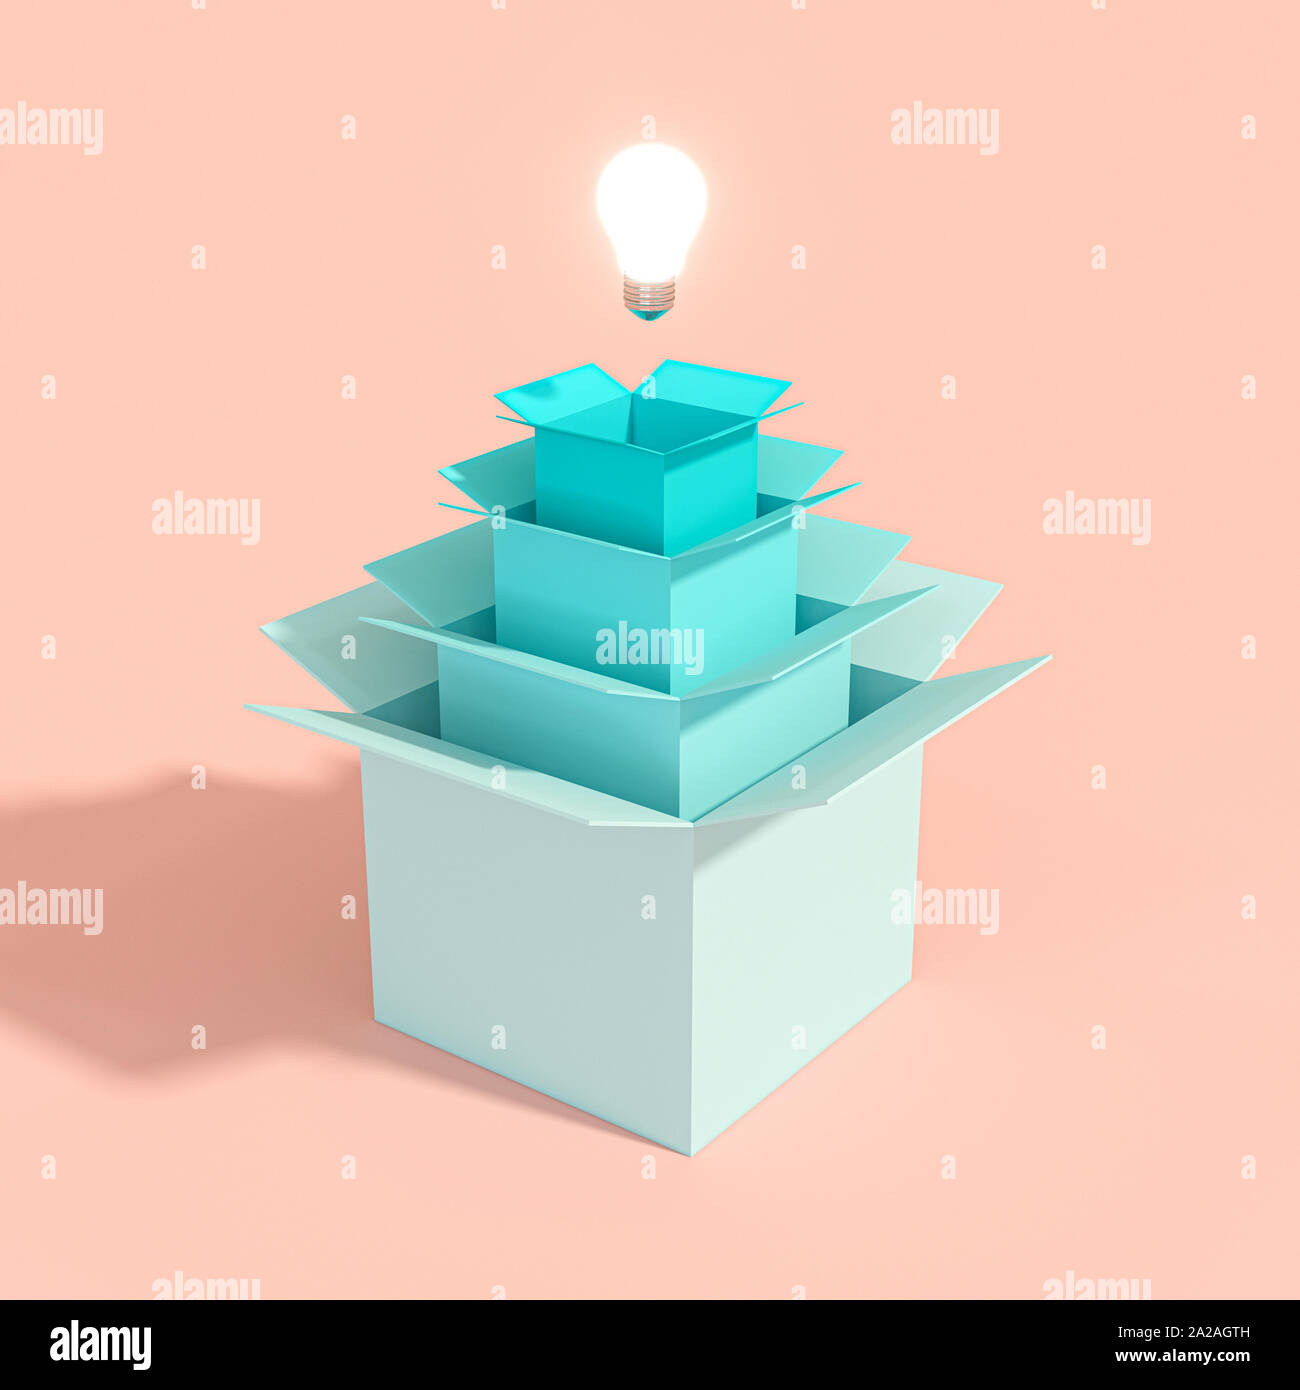 3d image render of a light bulb coming out of a series of boxes of different sizes. Concept of creativity and innovative ideas. Stock Photo